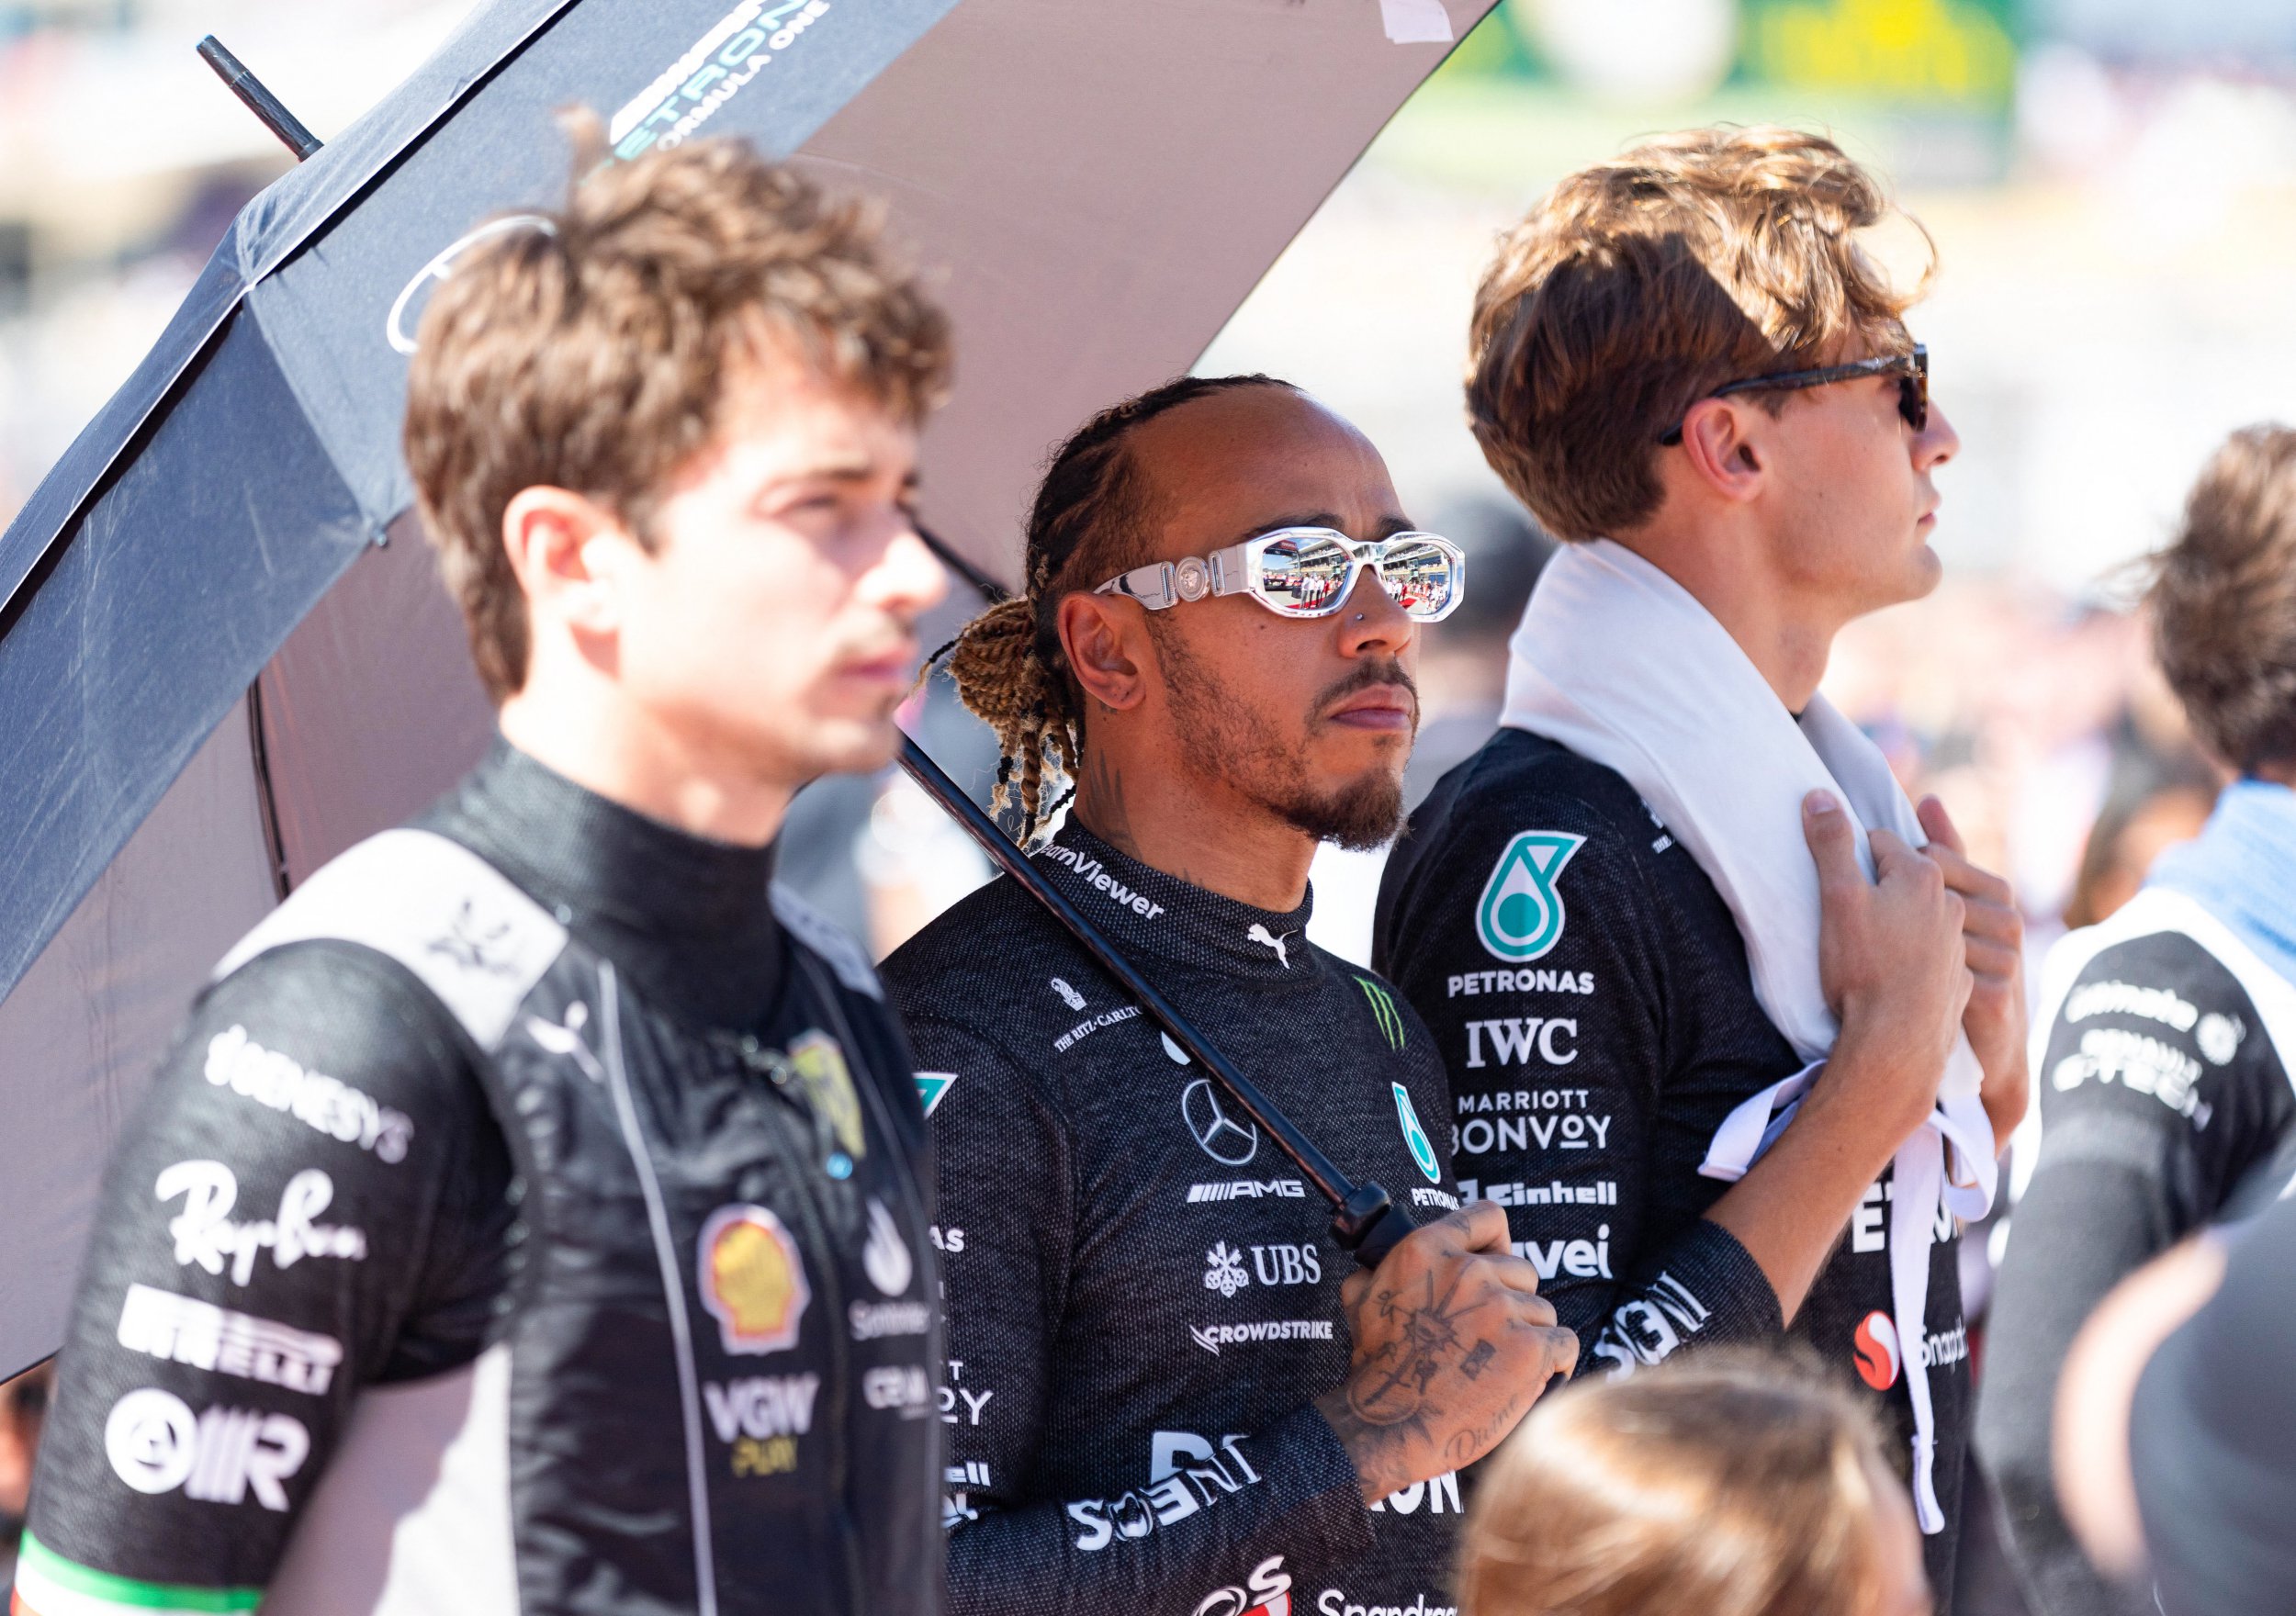 Lewis Hamilton sensationally DISQUALIFIED from US Grand Prix after failing post-race inspection in huge controversy